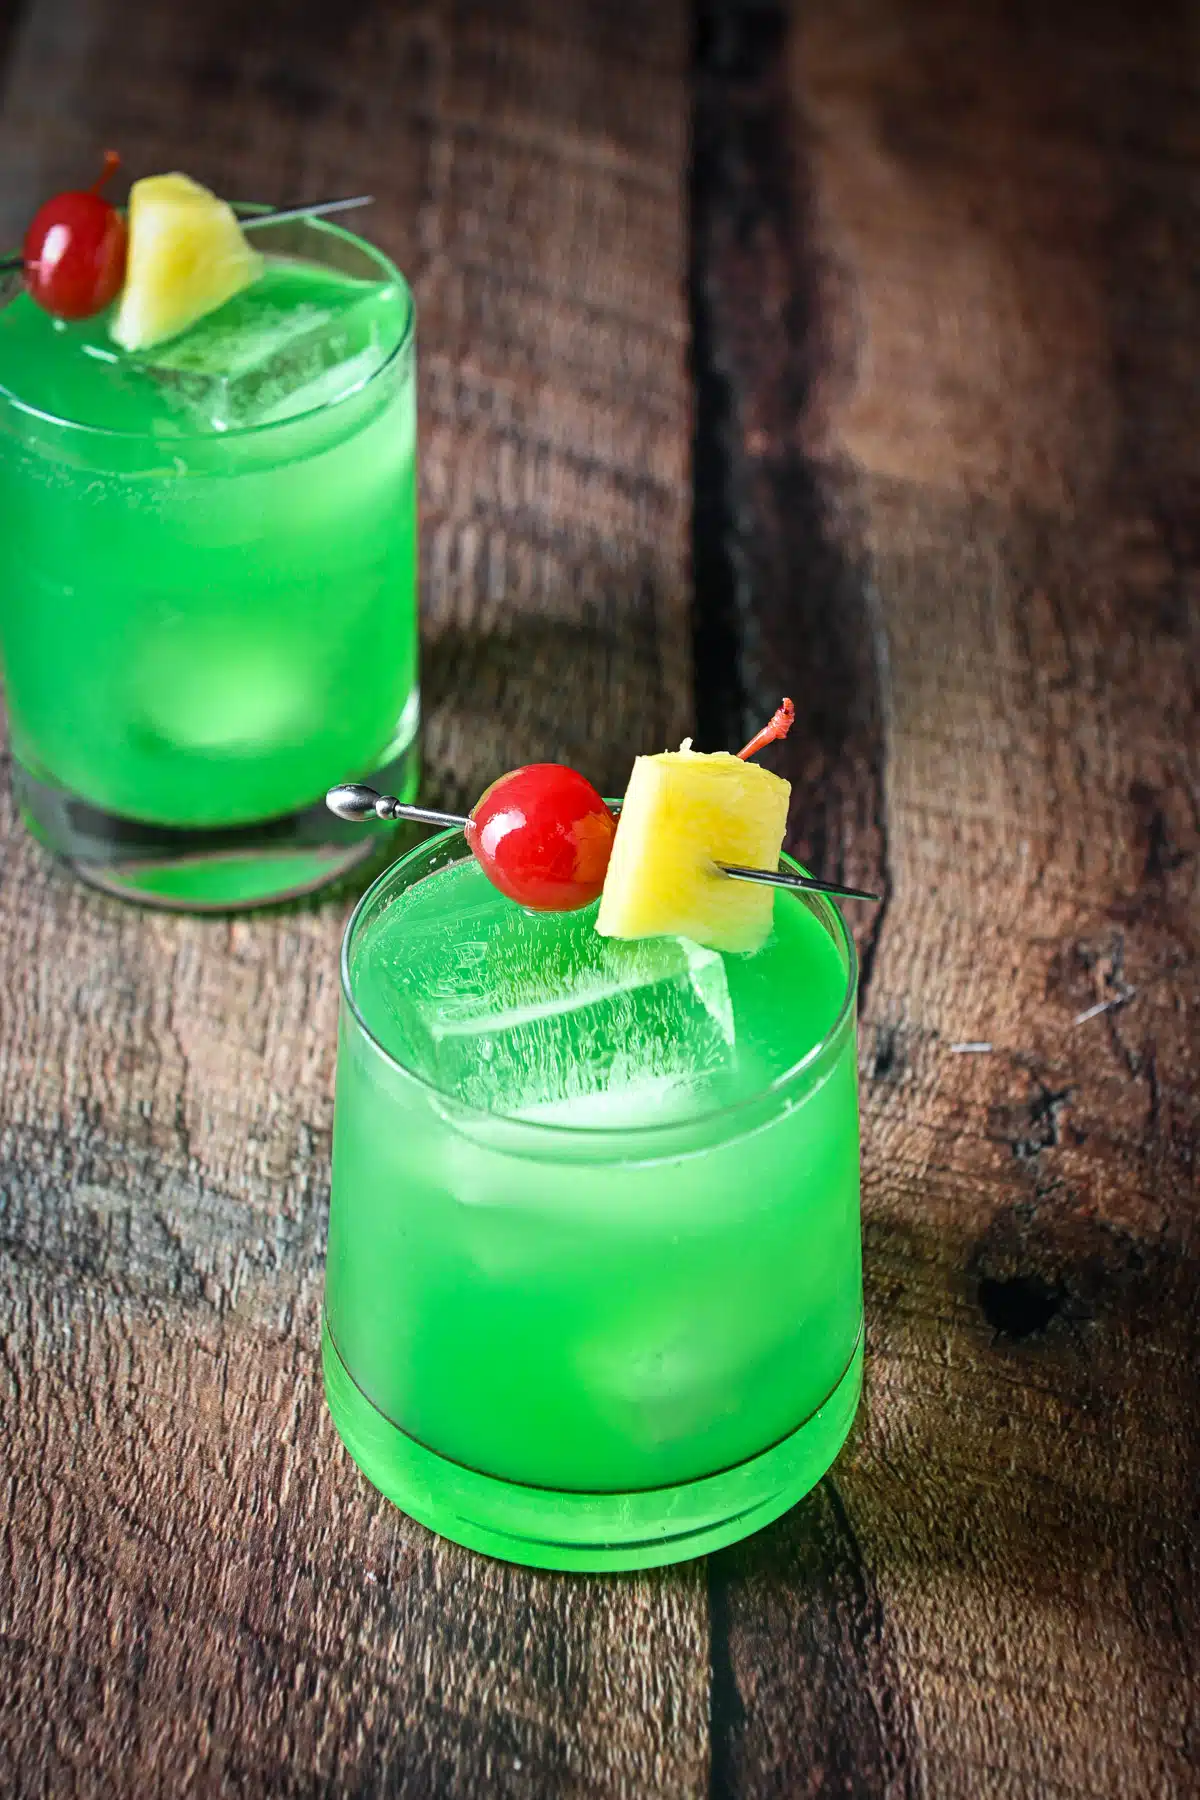 Higher view of the green cocktail with the garnish of cherries and pineapple on skewers